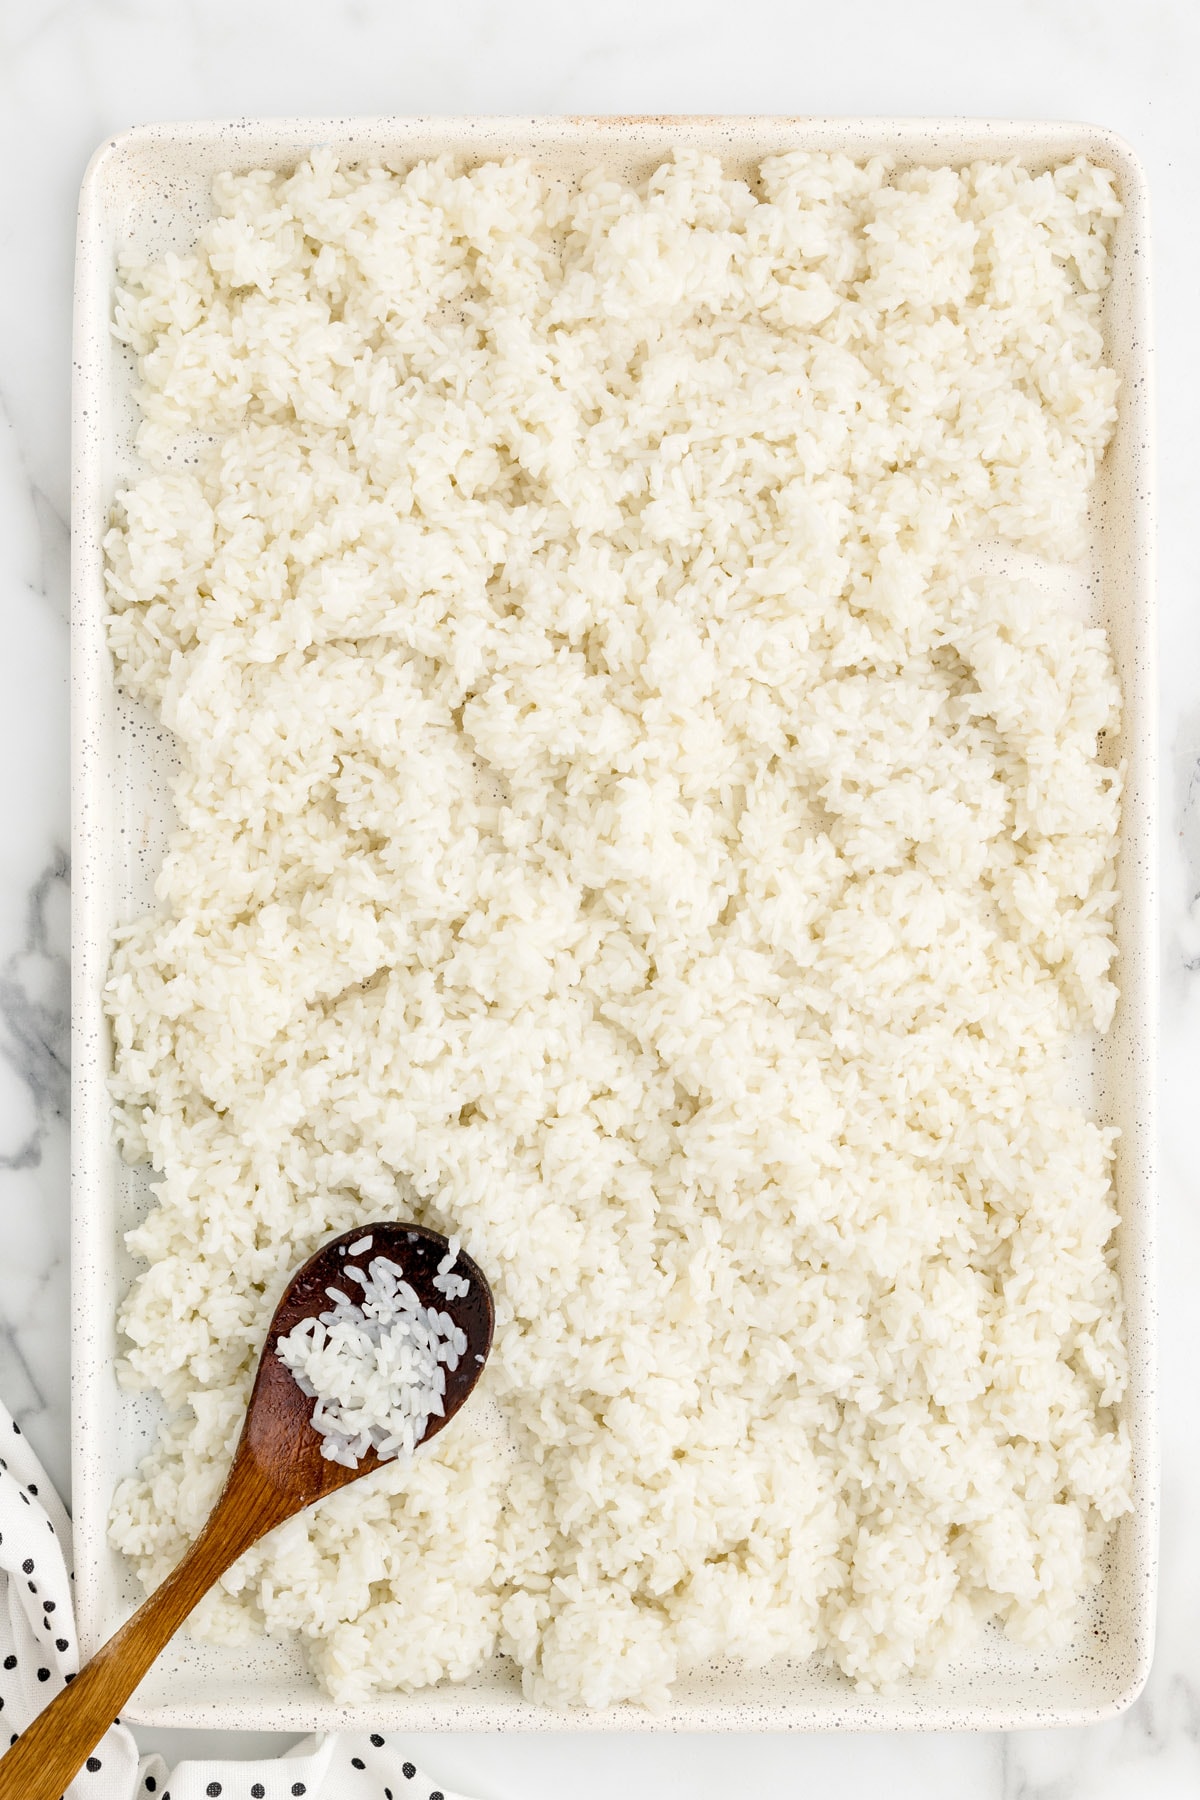 spread rice on the baking sheet